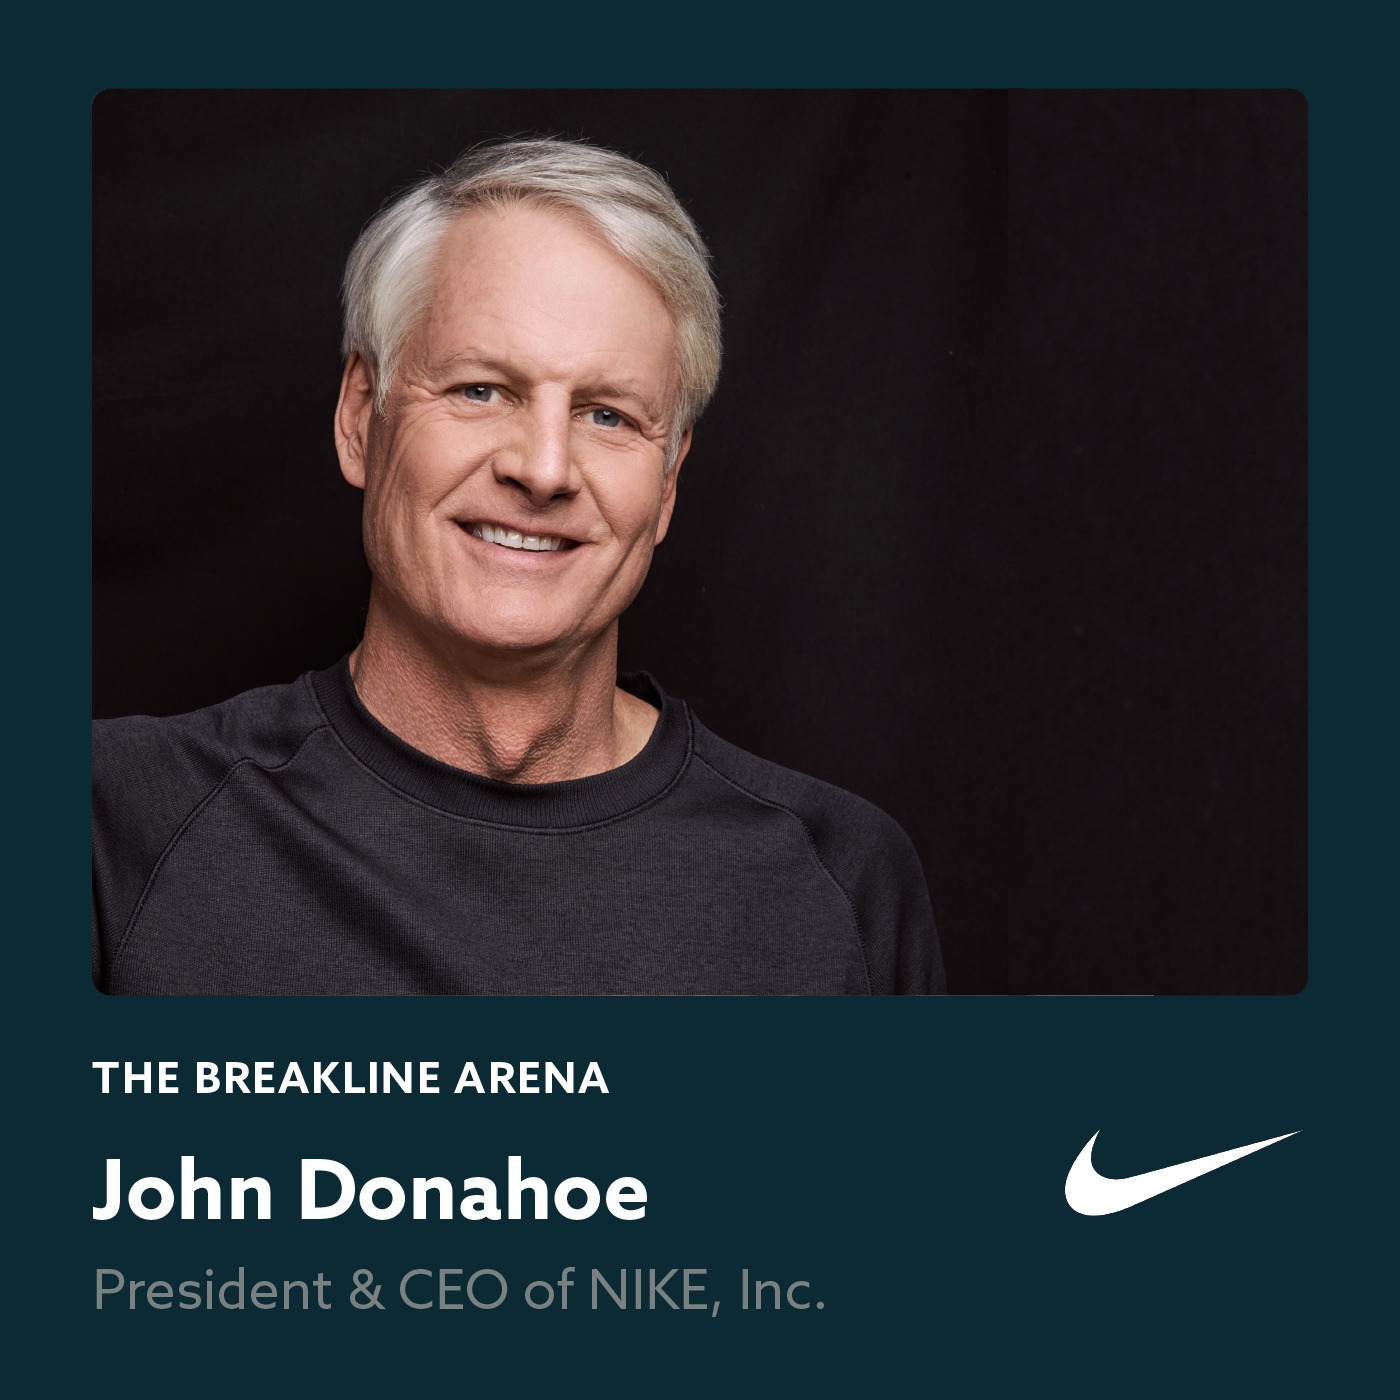 John Donahoe, President & CEO of NIKE, Inc. | Driven by Purpose